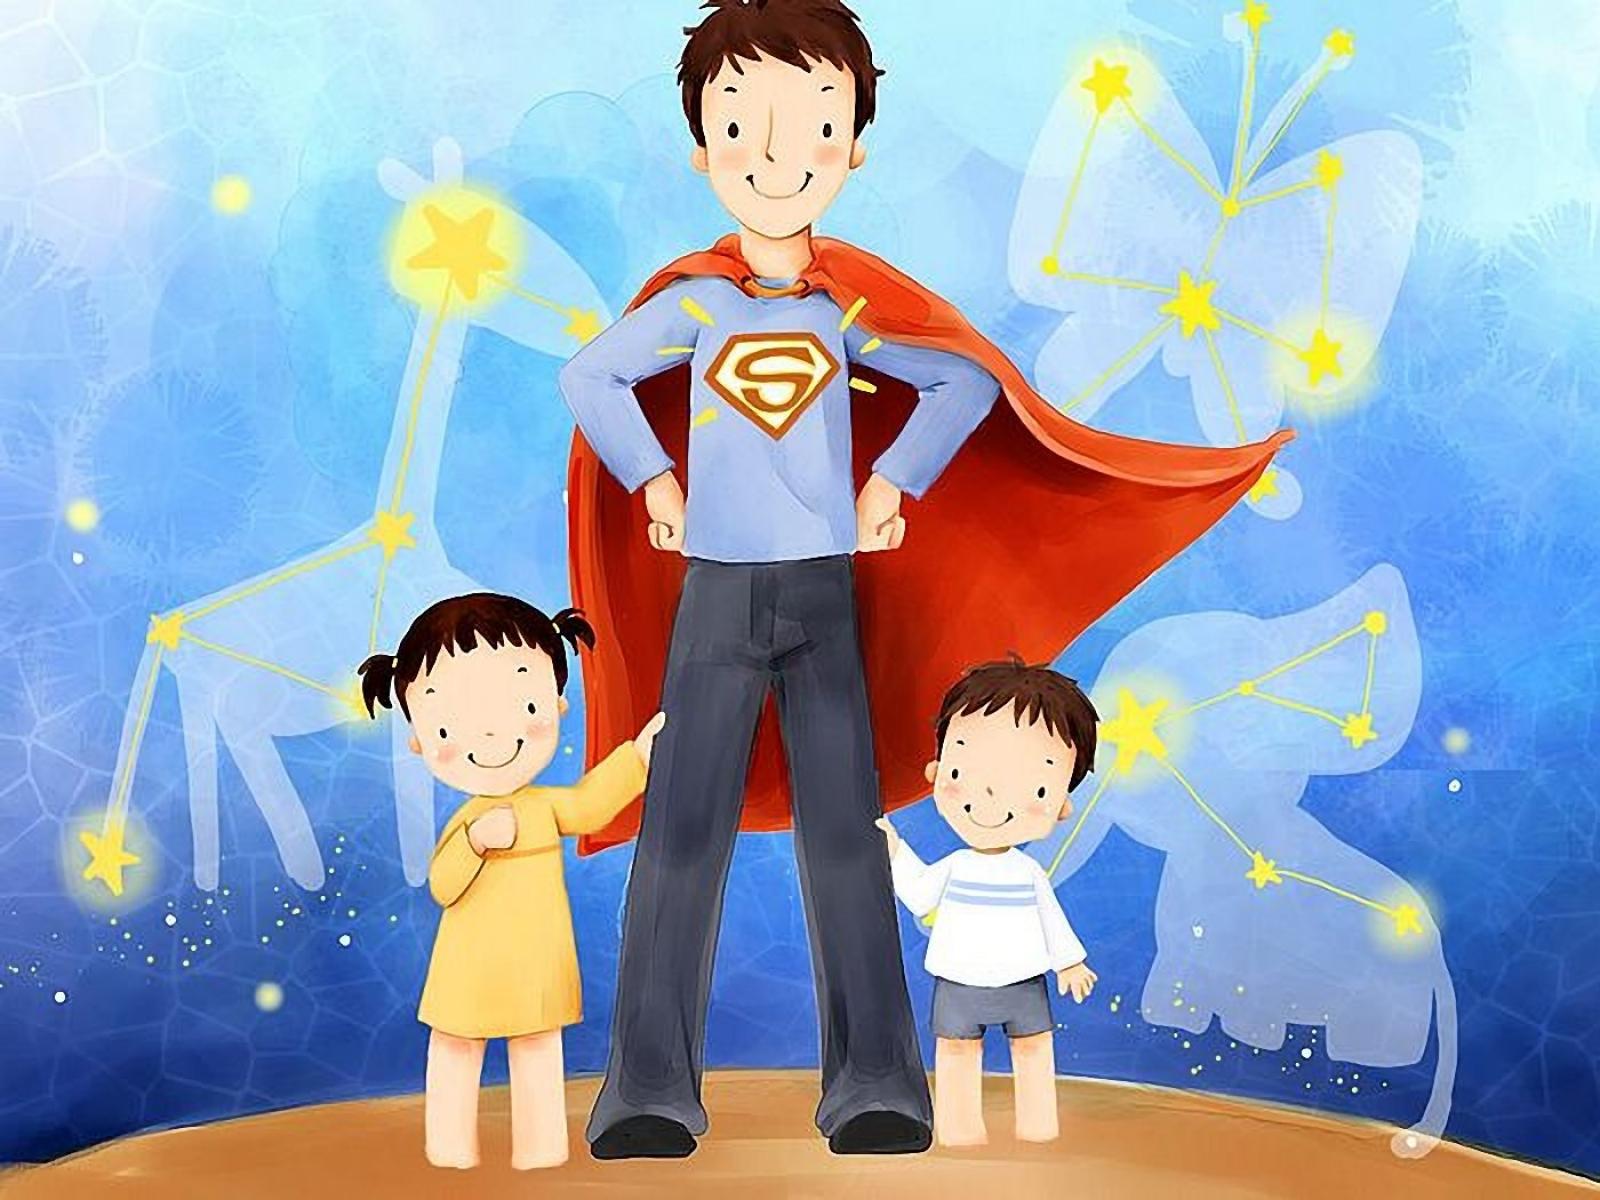 HD desktop wallpaper for Father's Day featuring an animated superhero dad with two children against a starry background.